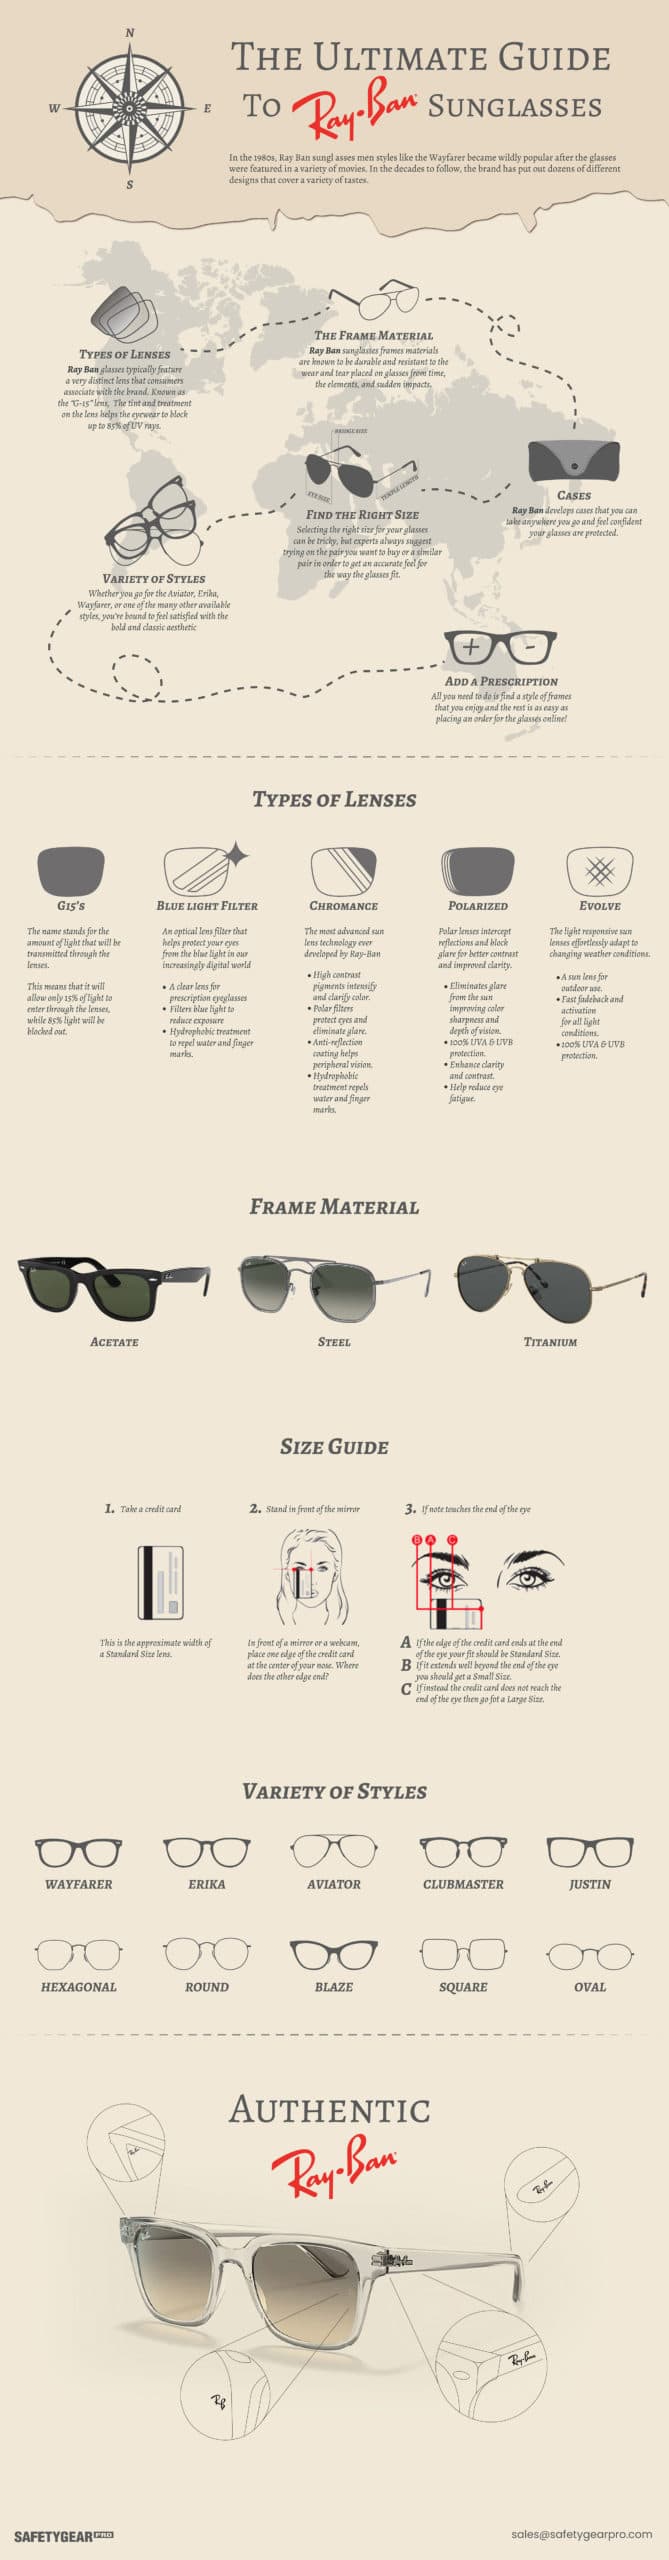 recipe argument Catholic Guide to Ray Bans | Safety Gear Pro